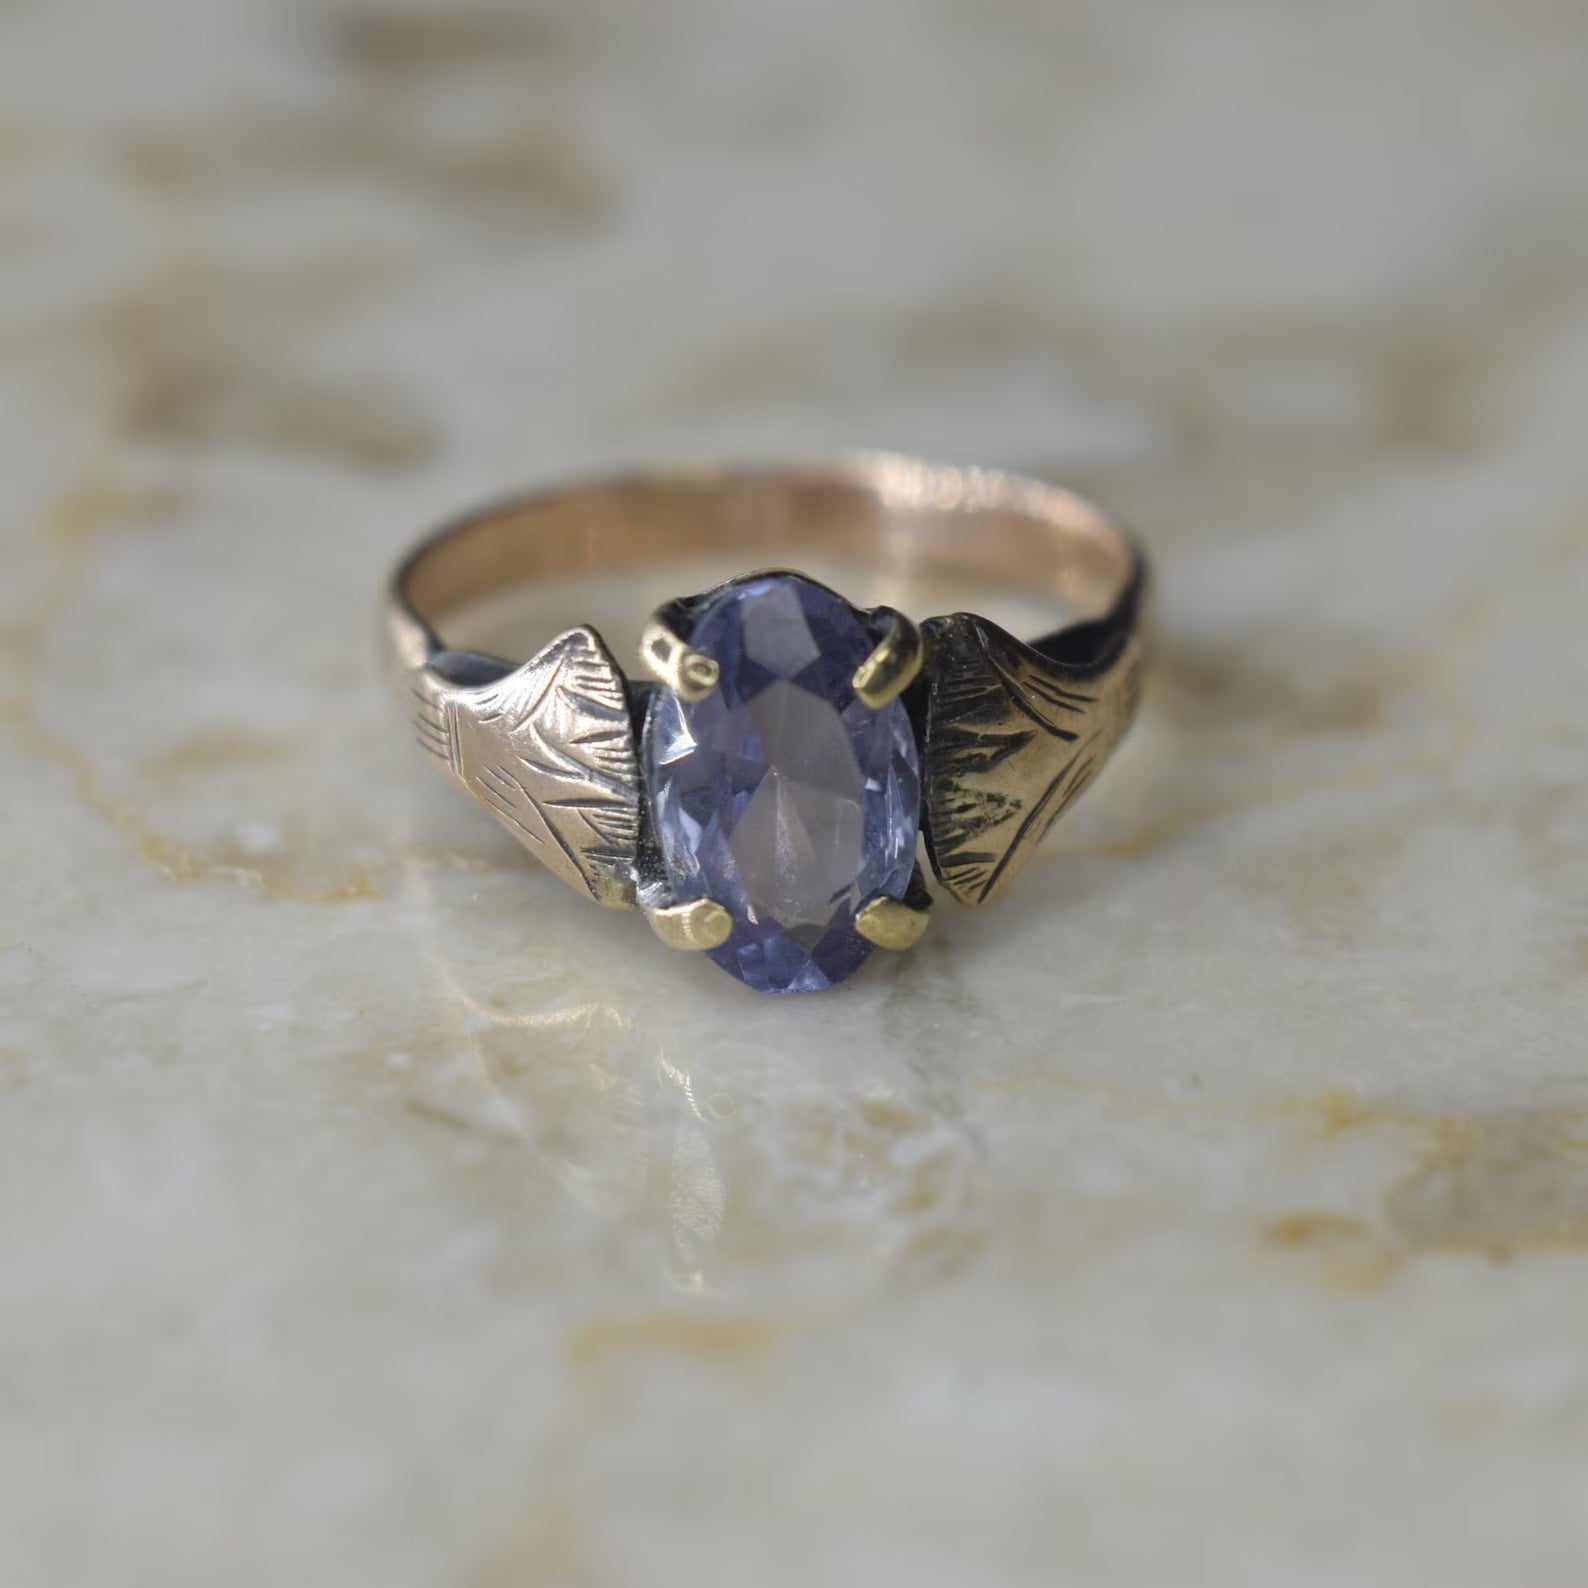 Vintage 14k Gold Lotus Flower Ring with 1.36ct Color Change Sapphire c.1970s